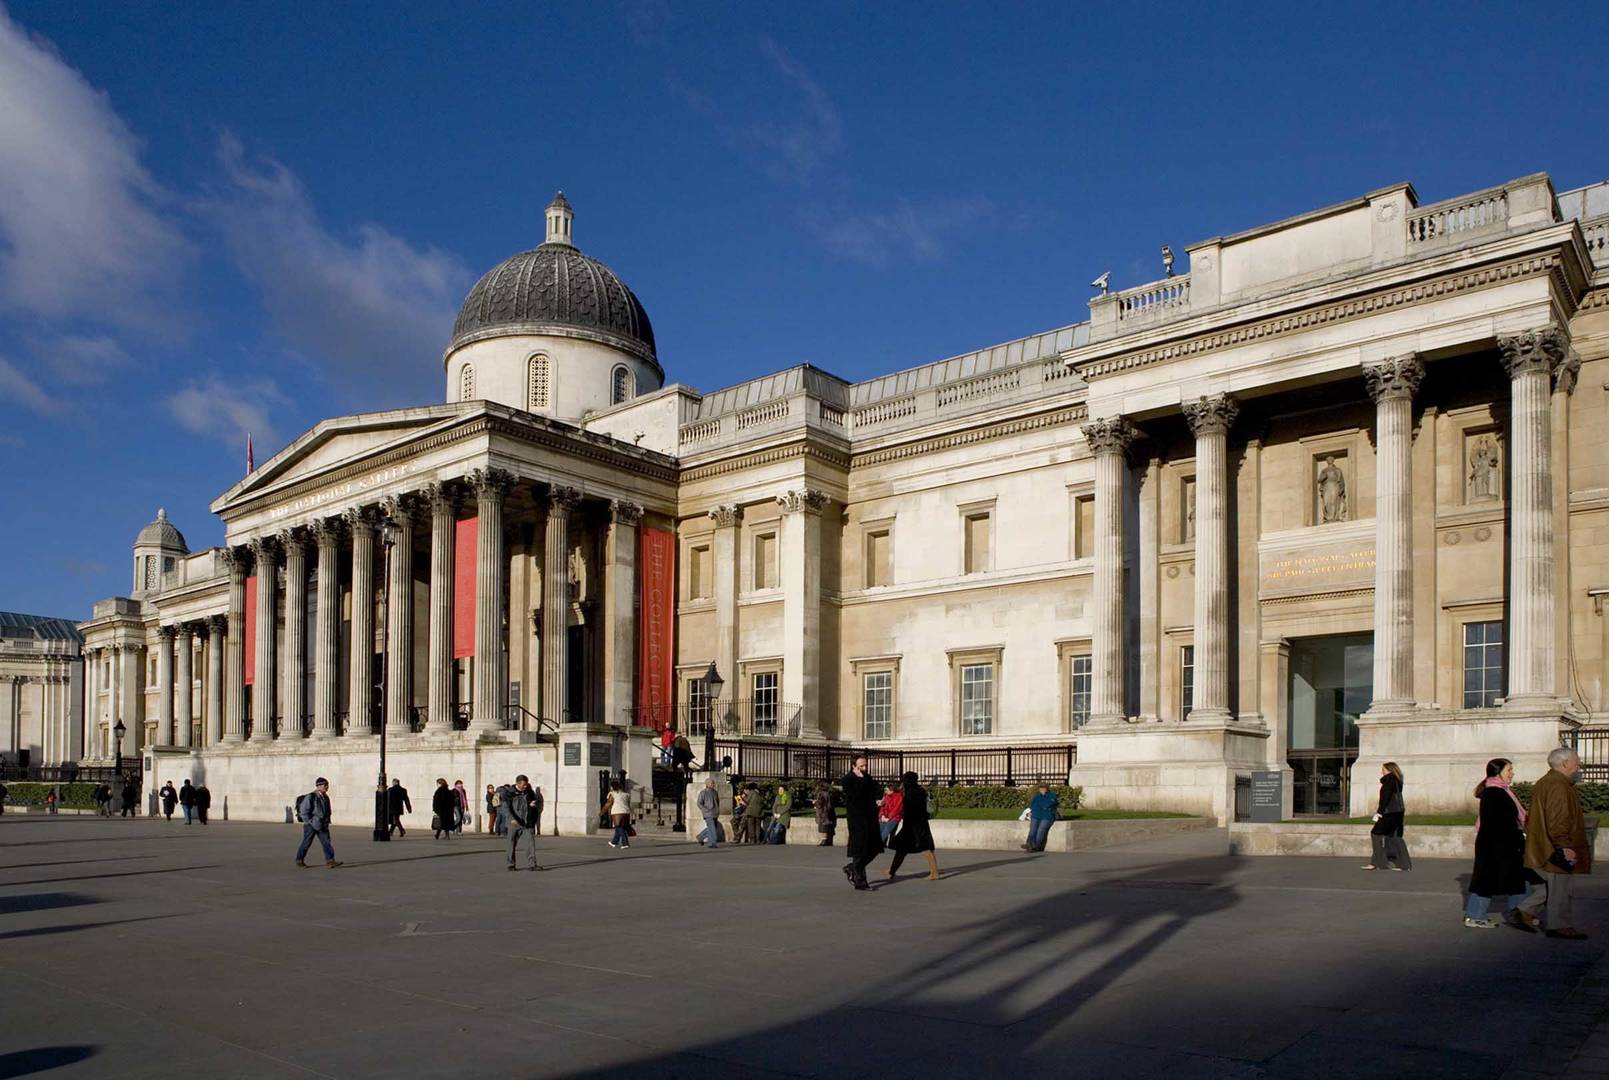 Outside London's National Gallery